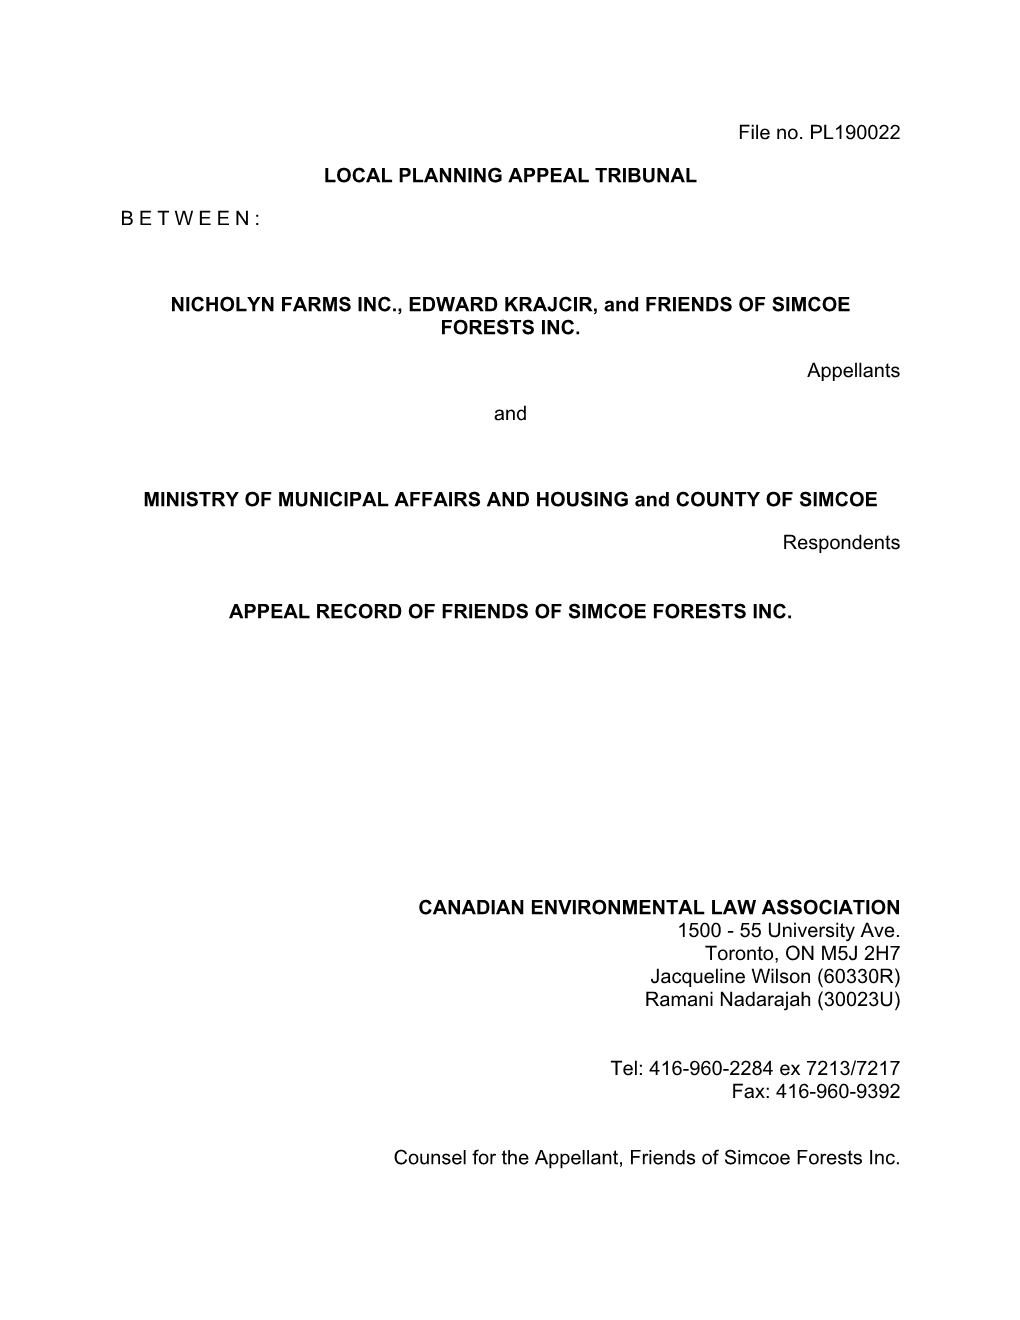 File No. PL190022 LOCAL PLANNING APPEAL TRIBUNAL BETWEEN: NICHOLYN FARMS INC., EDWARD KRAJCIR, and FRIENDS of SIMCOE FORESTS